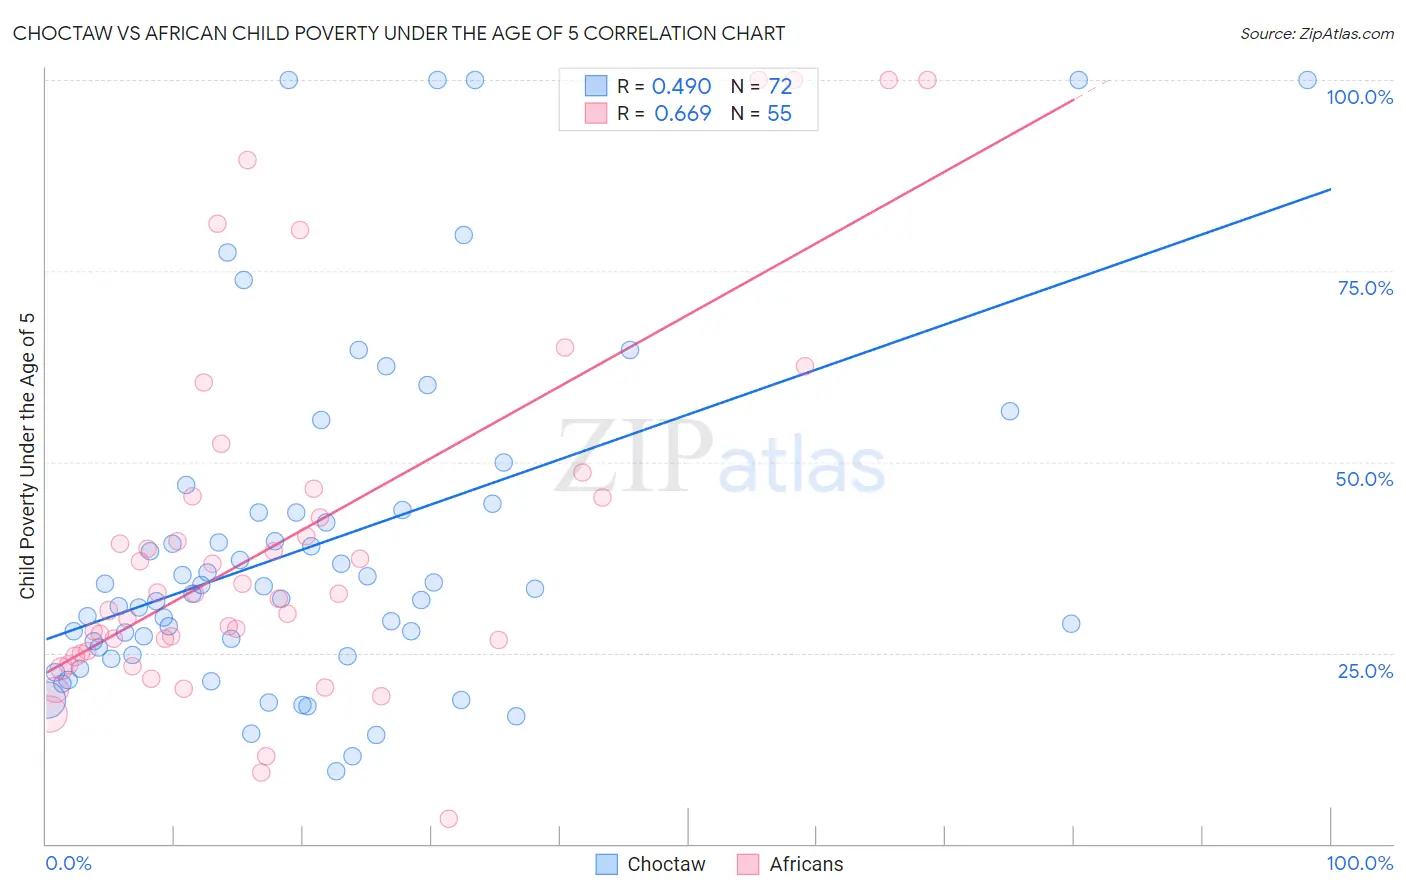 Choctaw vs African Child Poverty Under the Age of 5